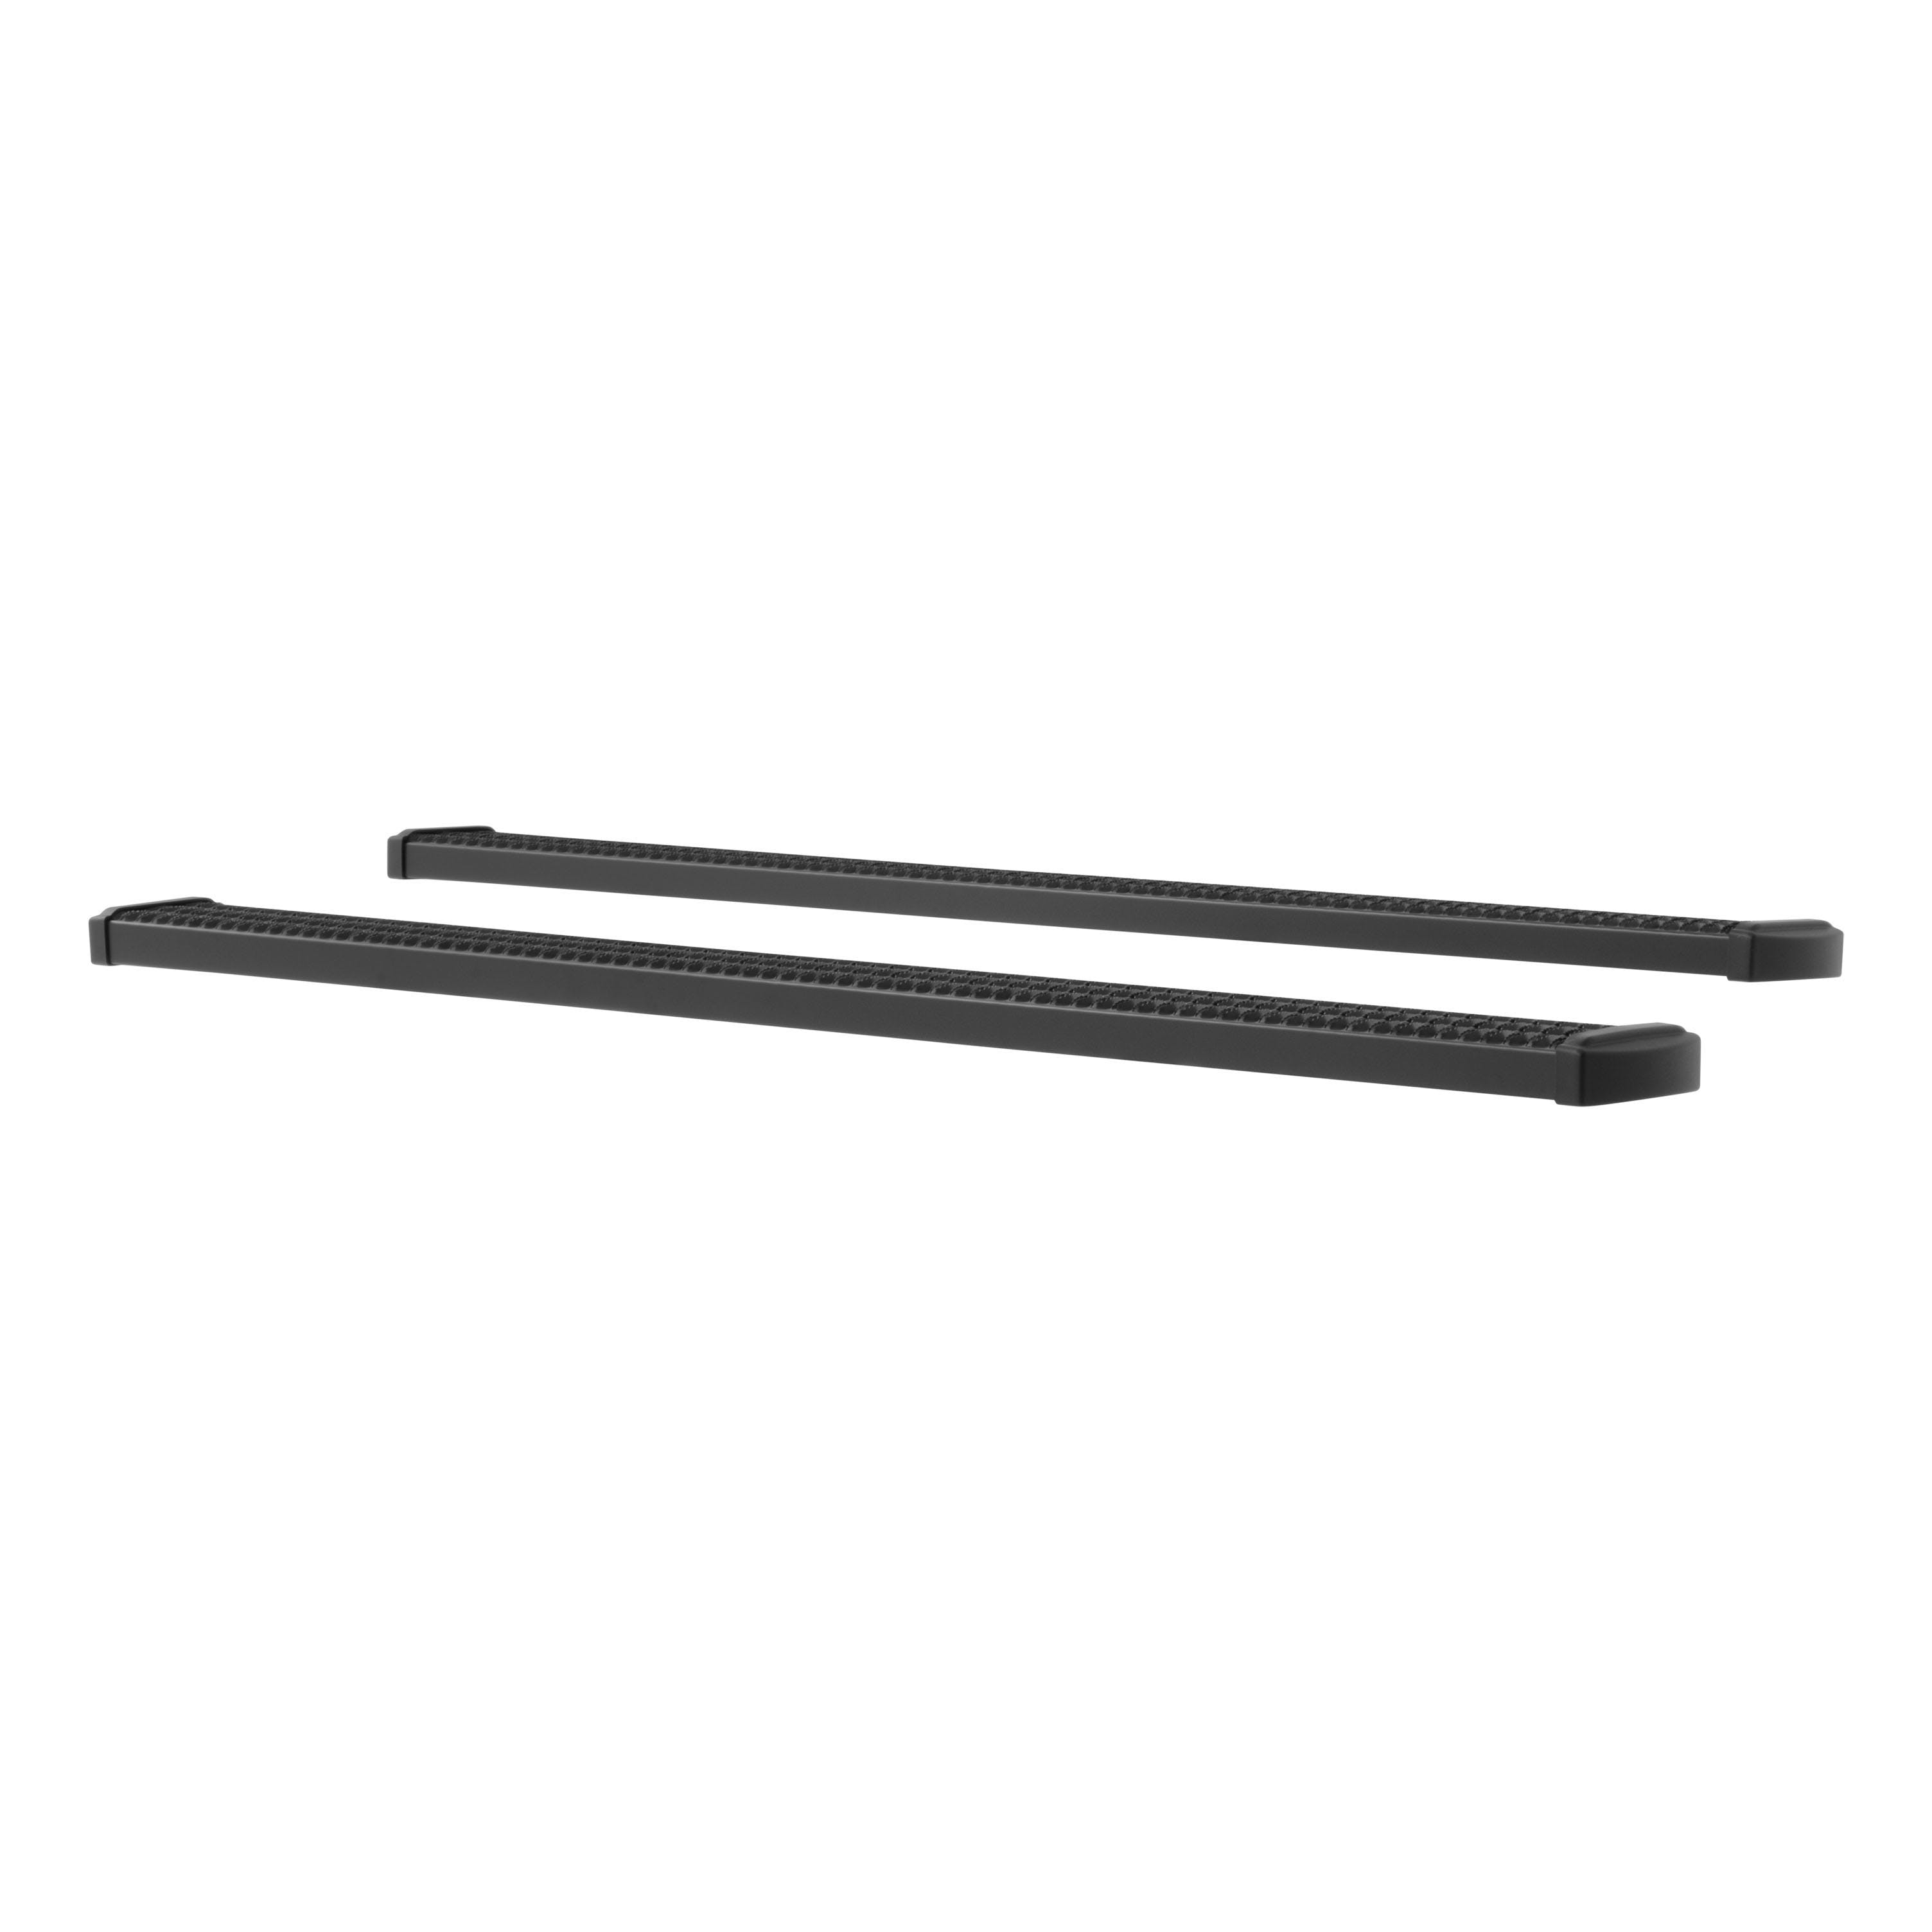 LUVERNE 415088-400717 Grip Step 7 inch Running Boards